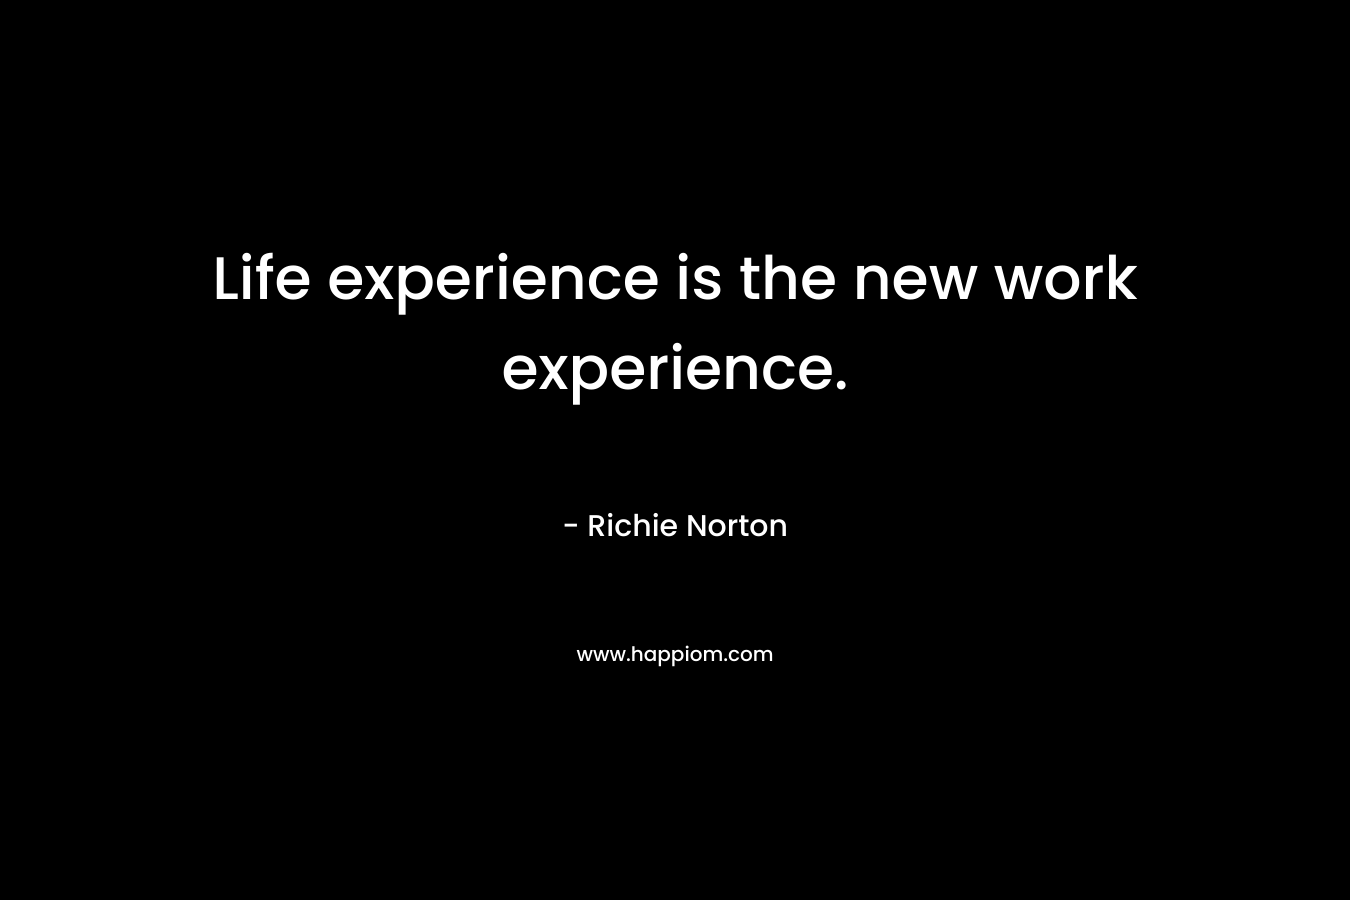 Life experience is the new work experience.